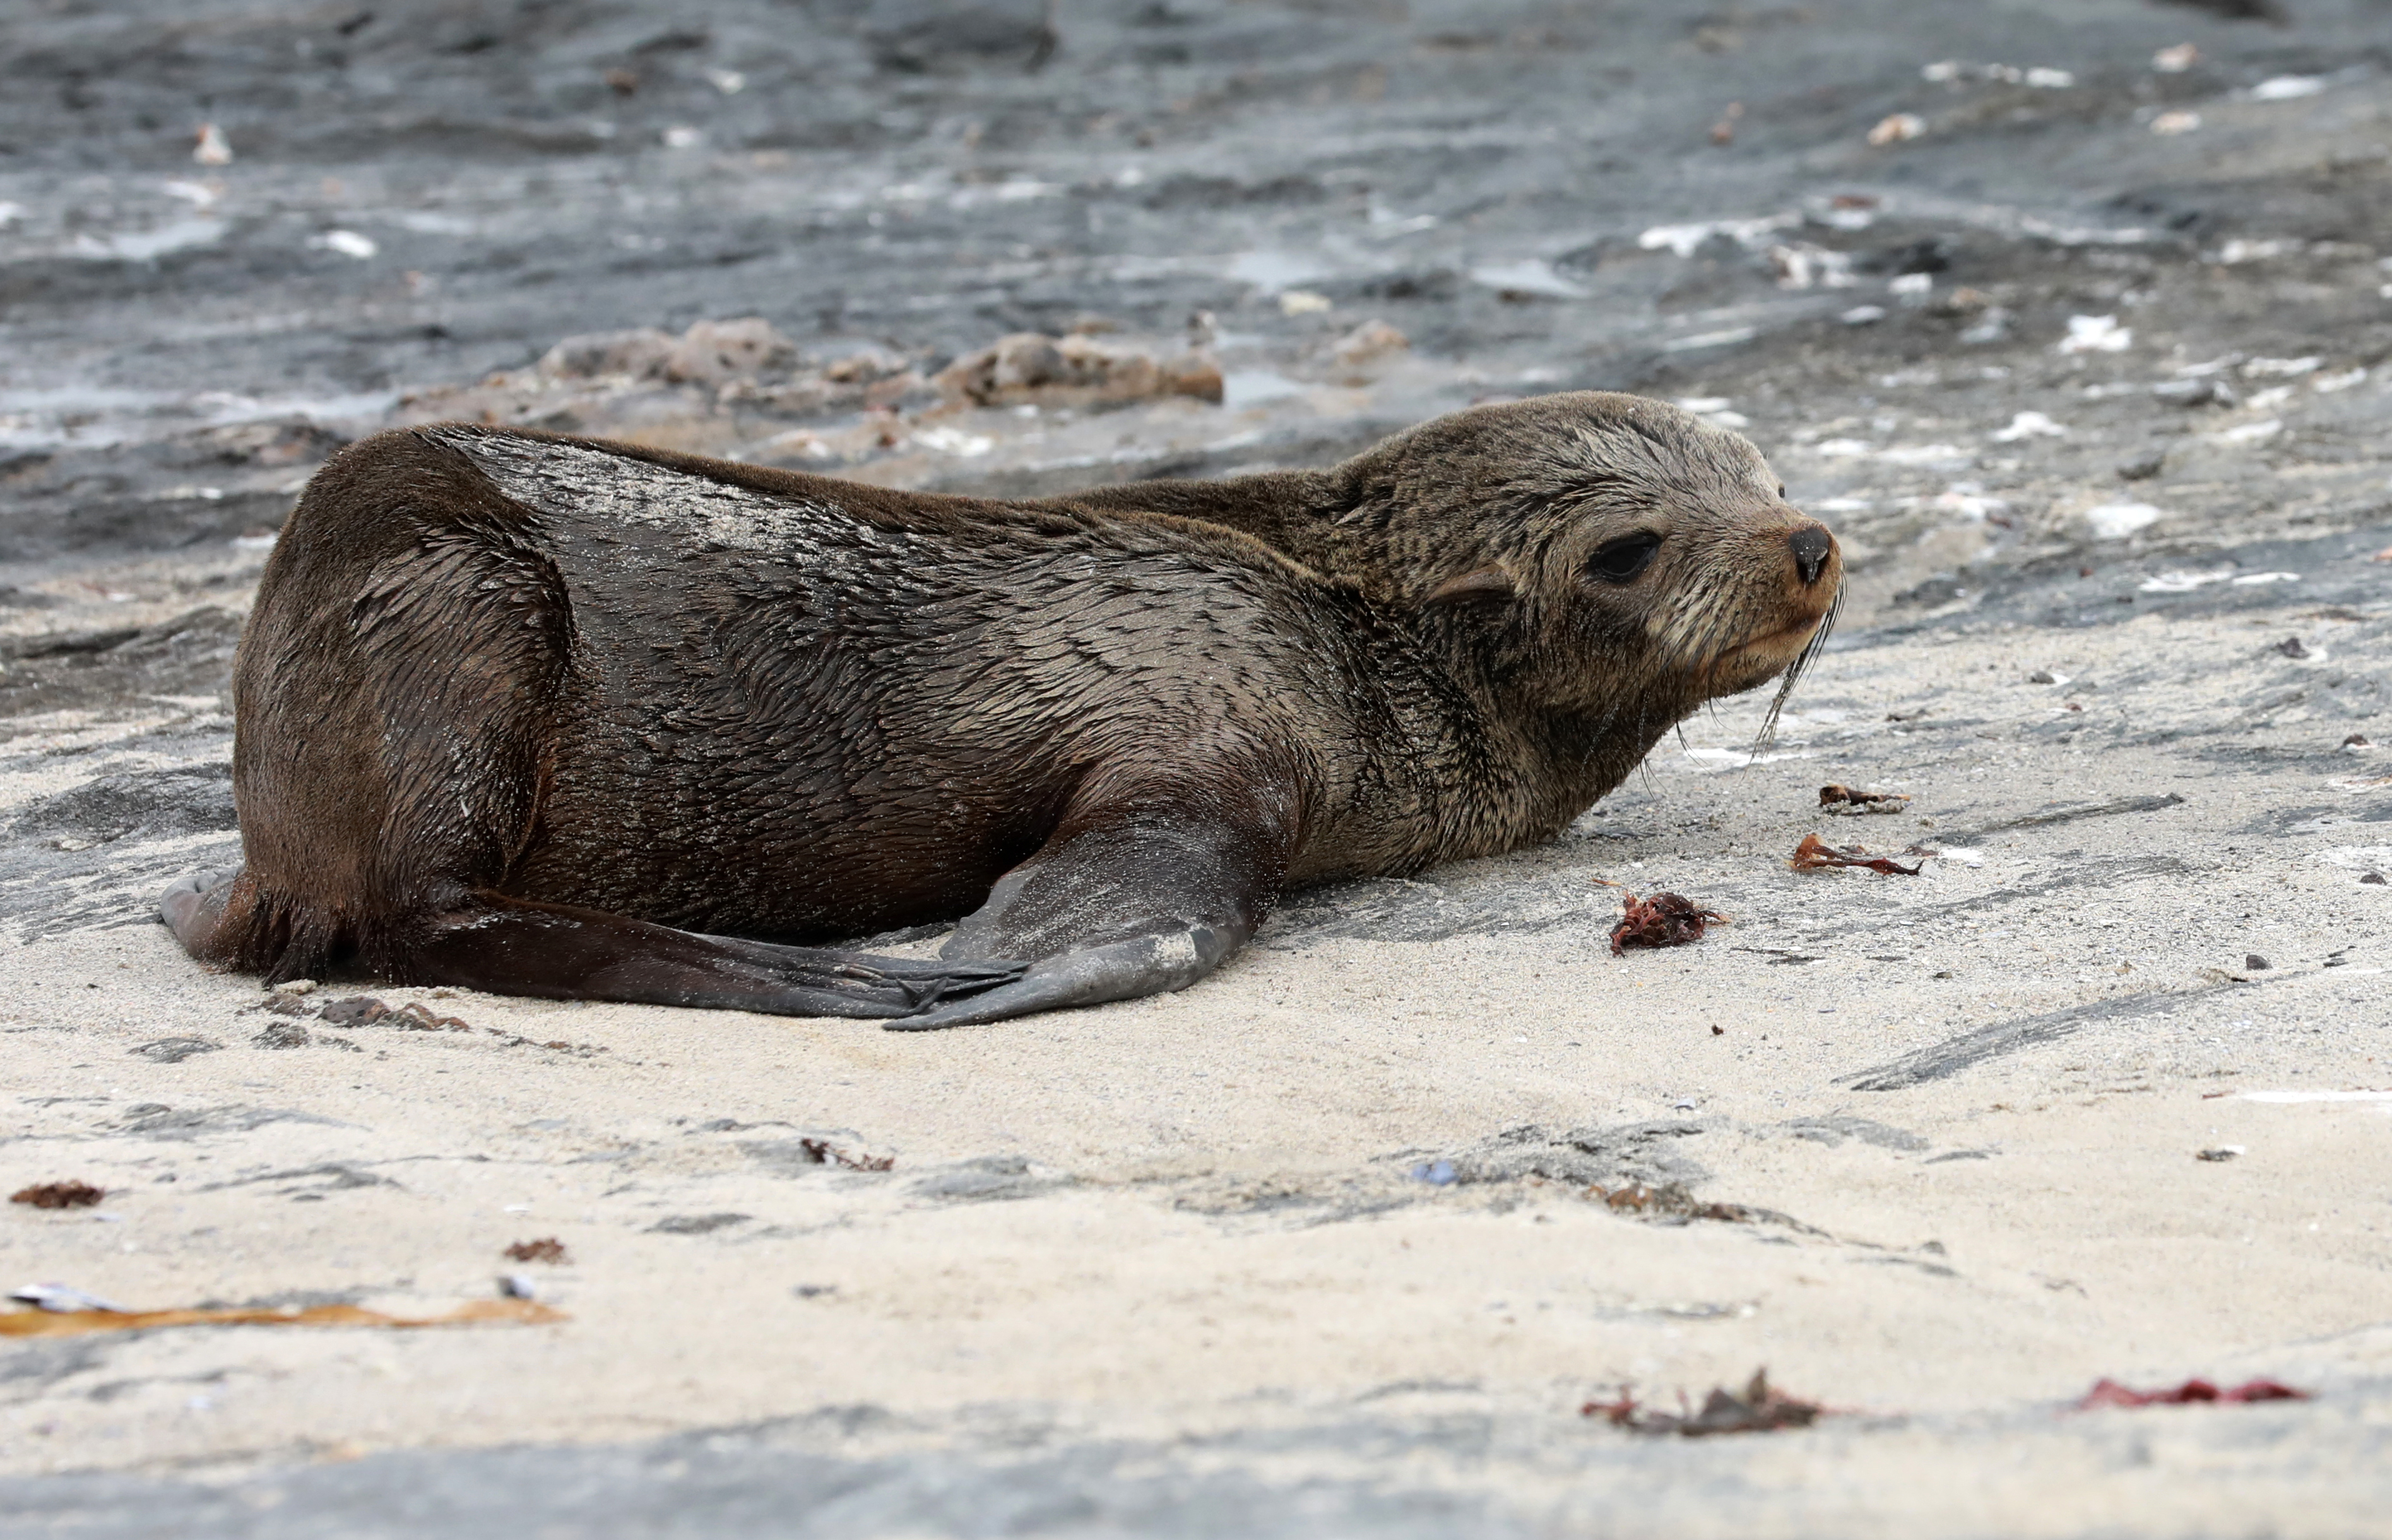 A Cape fur seals seen near Seal Island close to Koekenaap on the West Coast on November 22, 2020. Image: Gallo Images / Nardus Engelbrecht